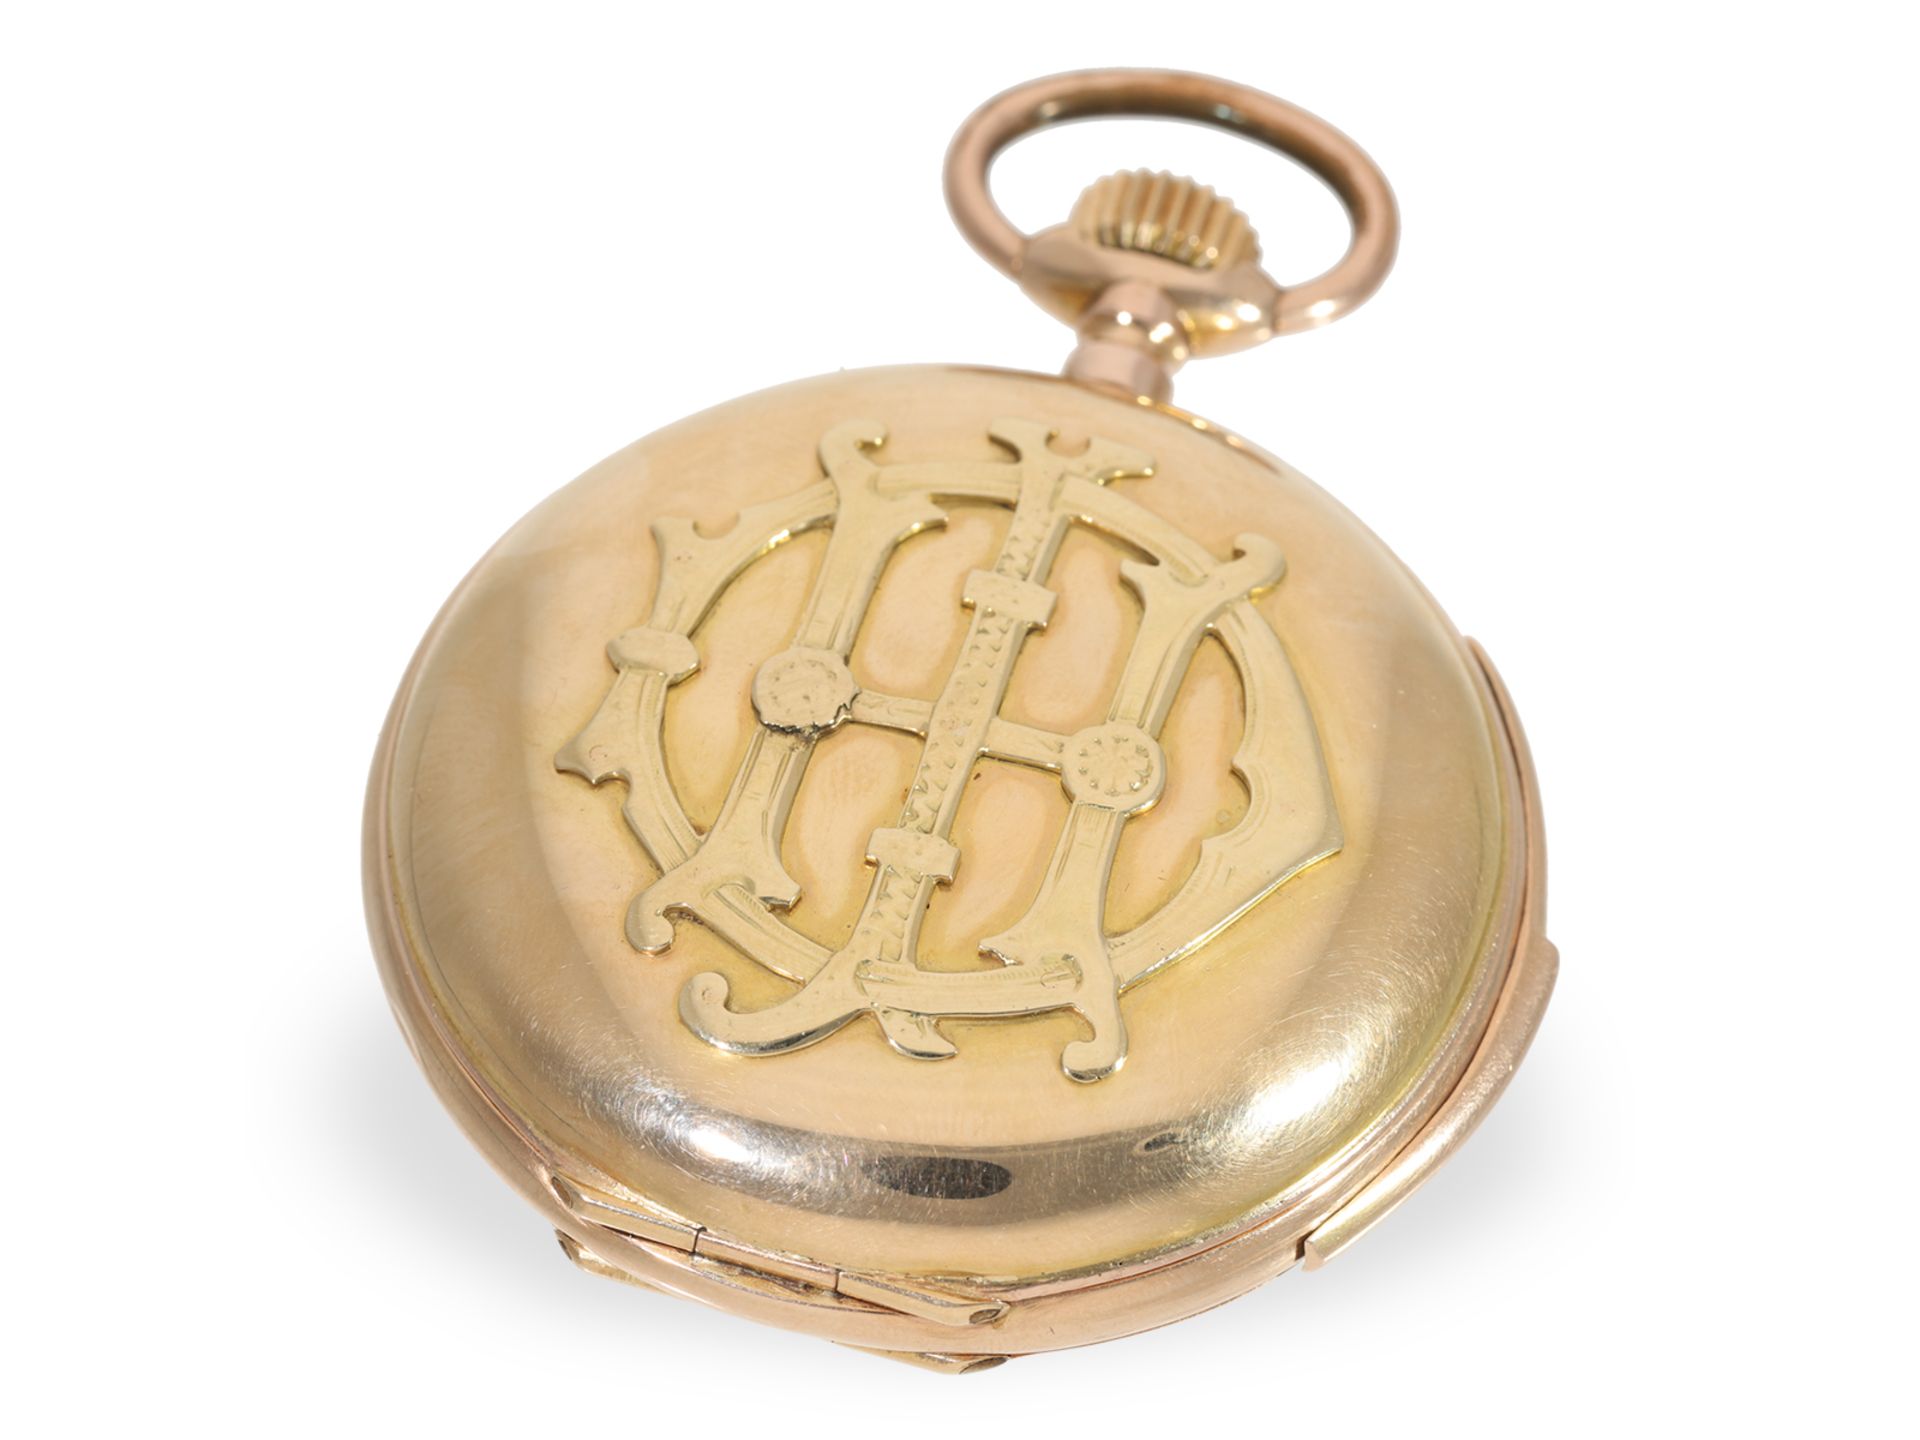 Pocket watch: heavy gold hunting case watch with minute repeater and erotic automaton, ca. 1900 - Image 4 of 6